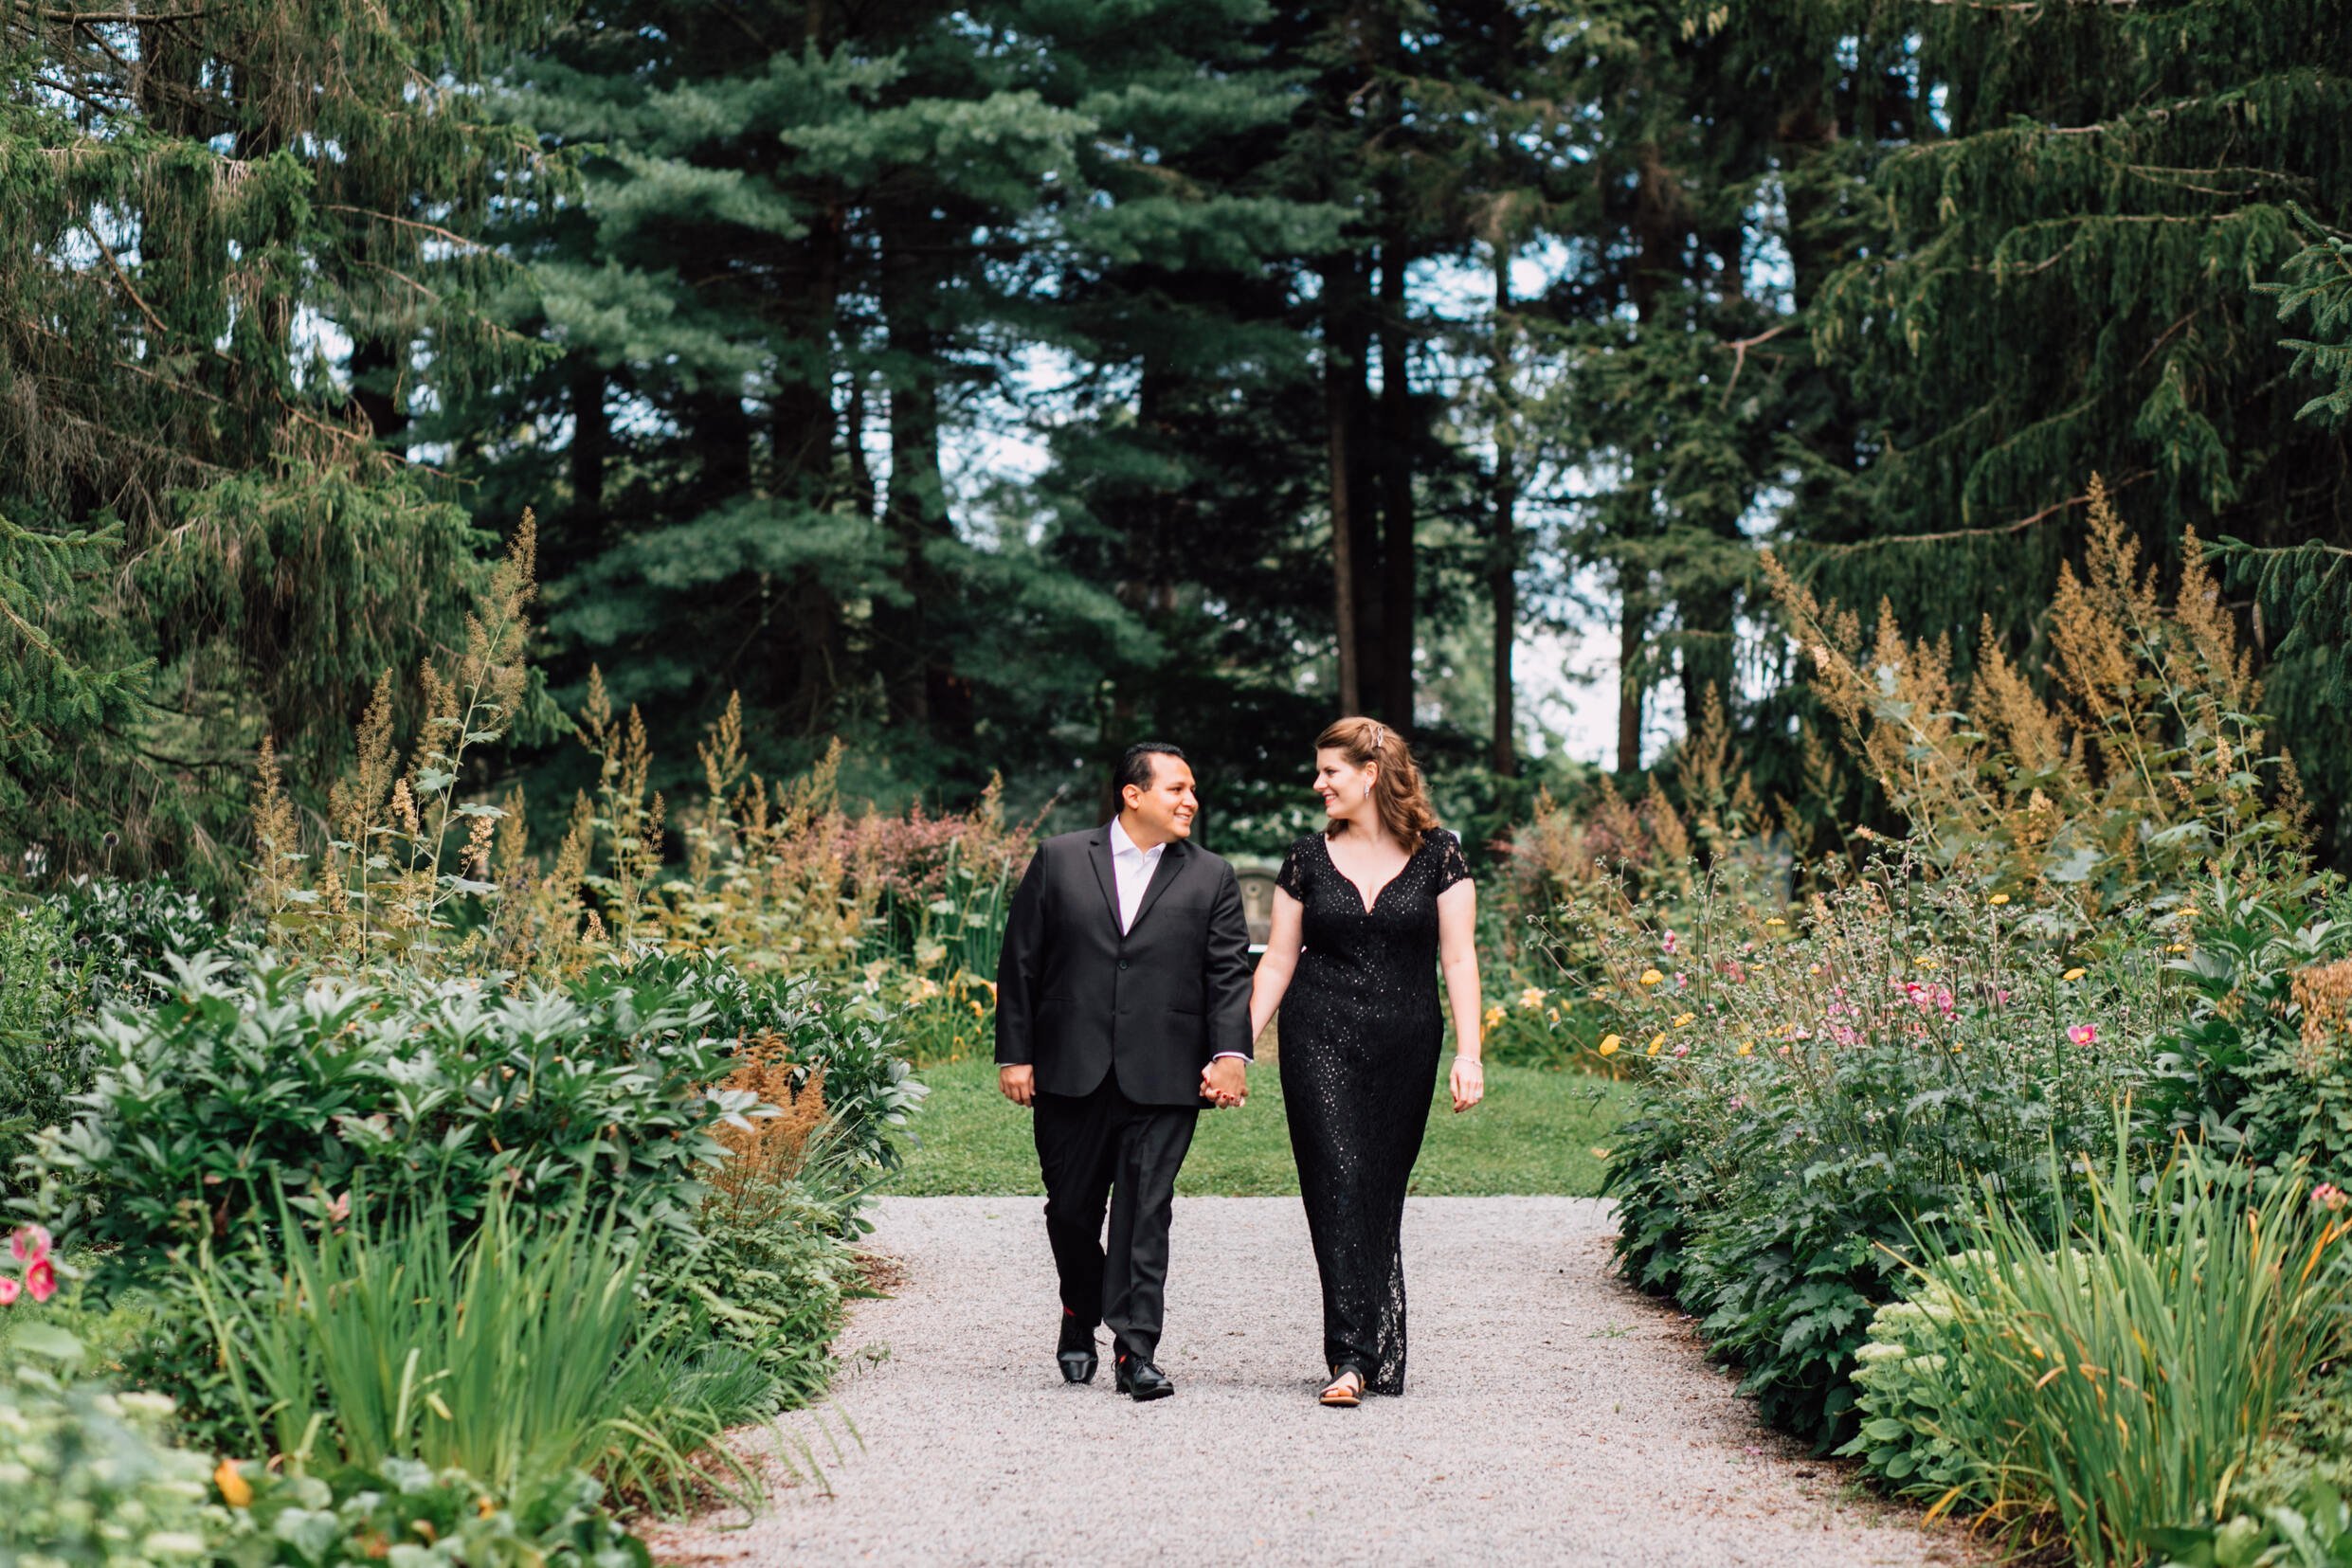  Married couple glance at each other as they walk down a garden path during their anniversary photoshoot 